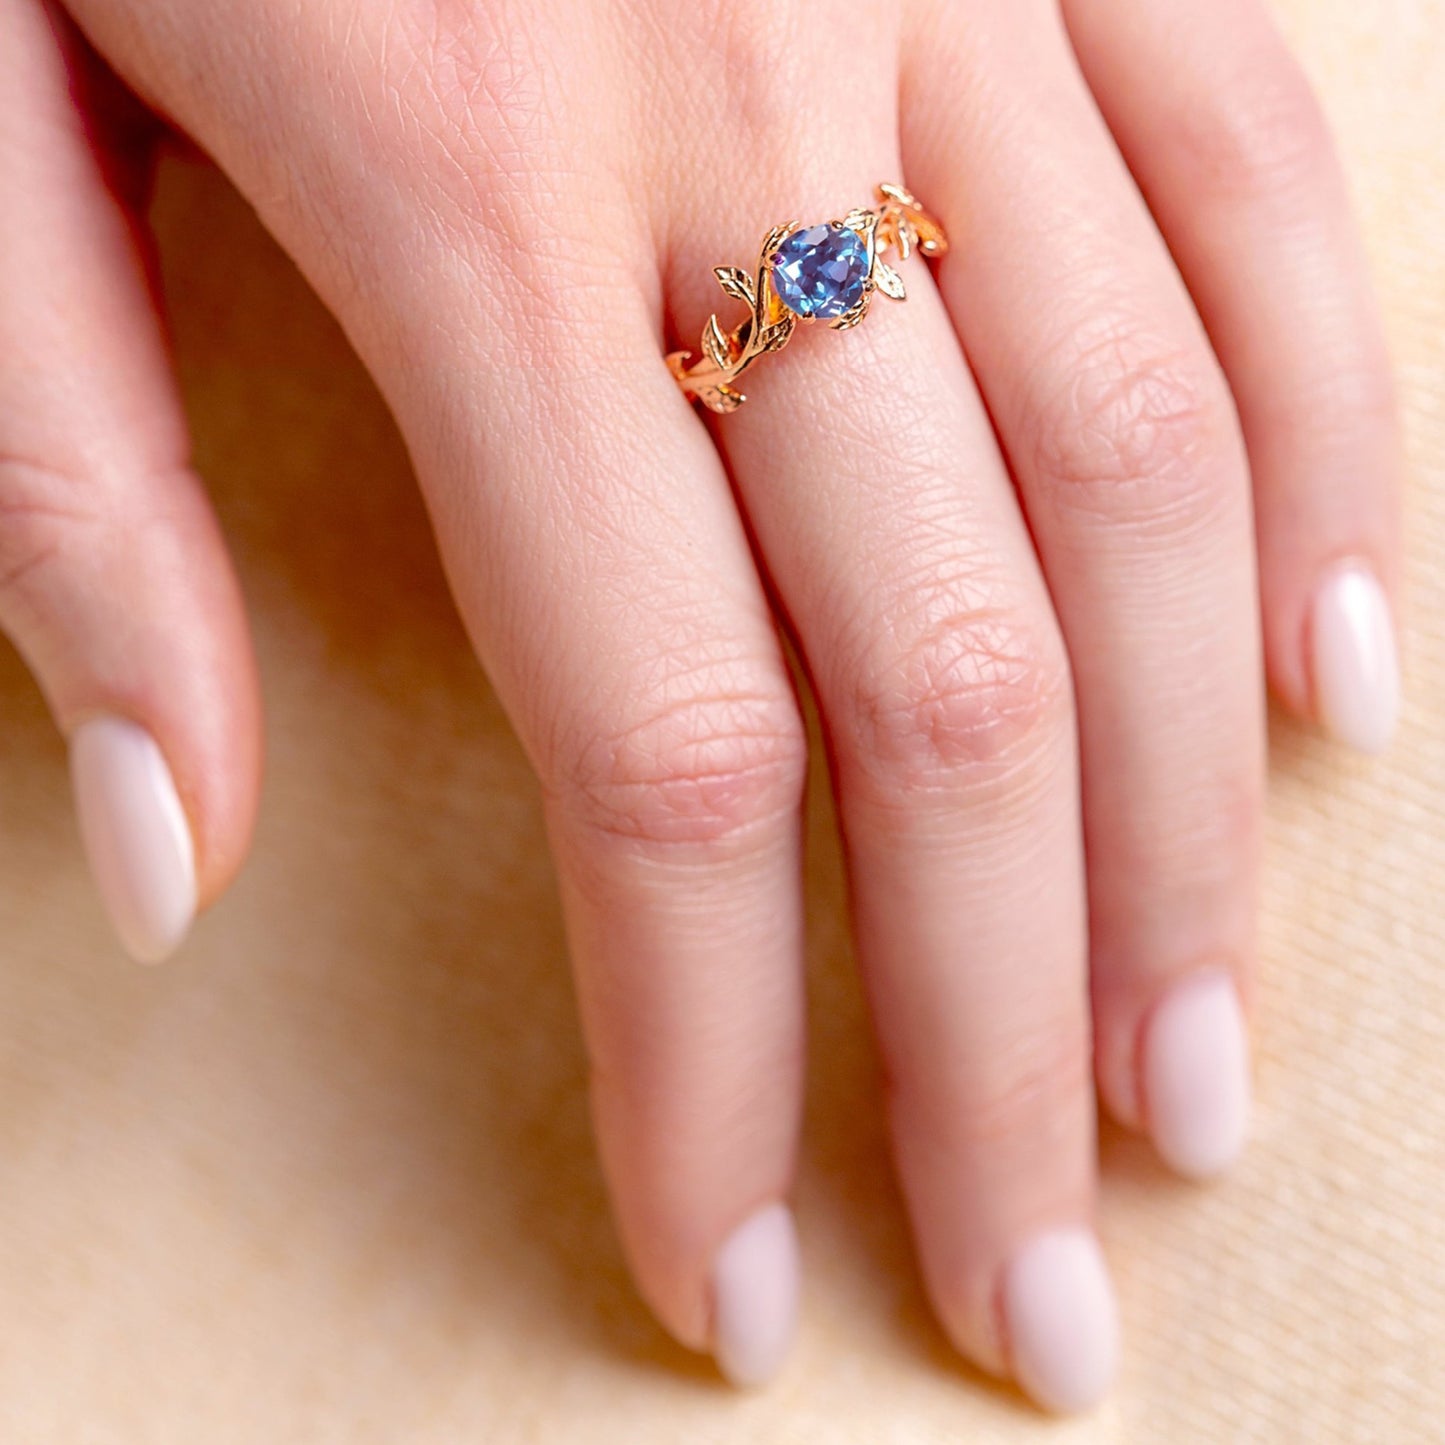 Ring with a blue alexandrite stone on a tender woman hand